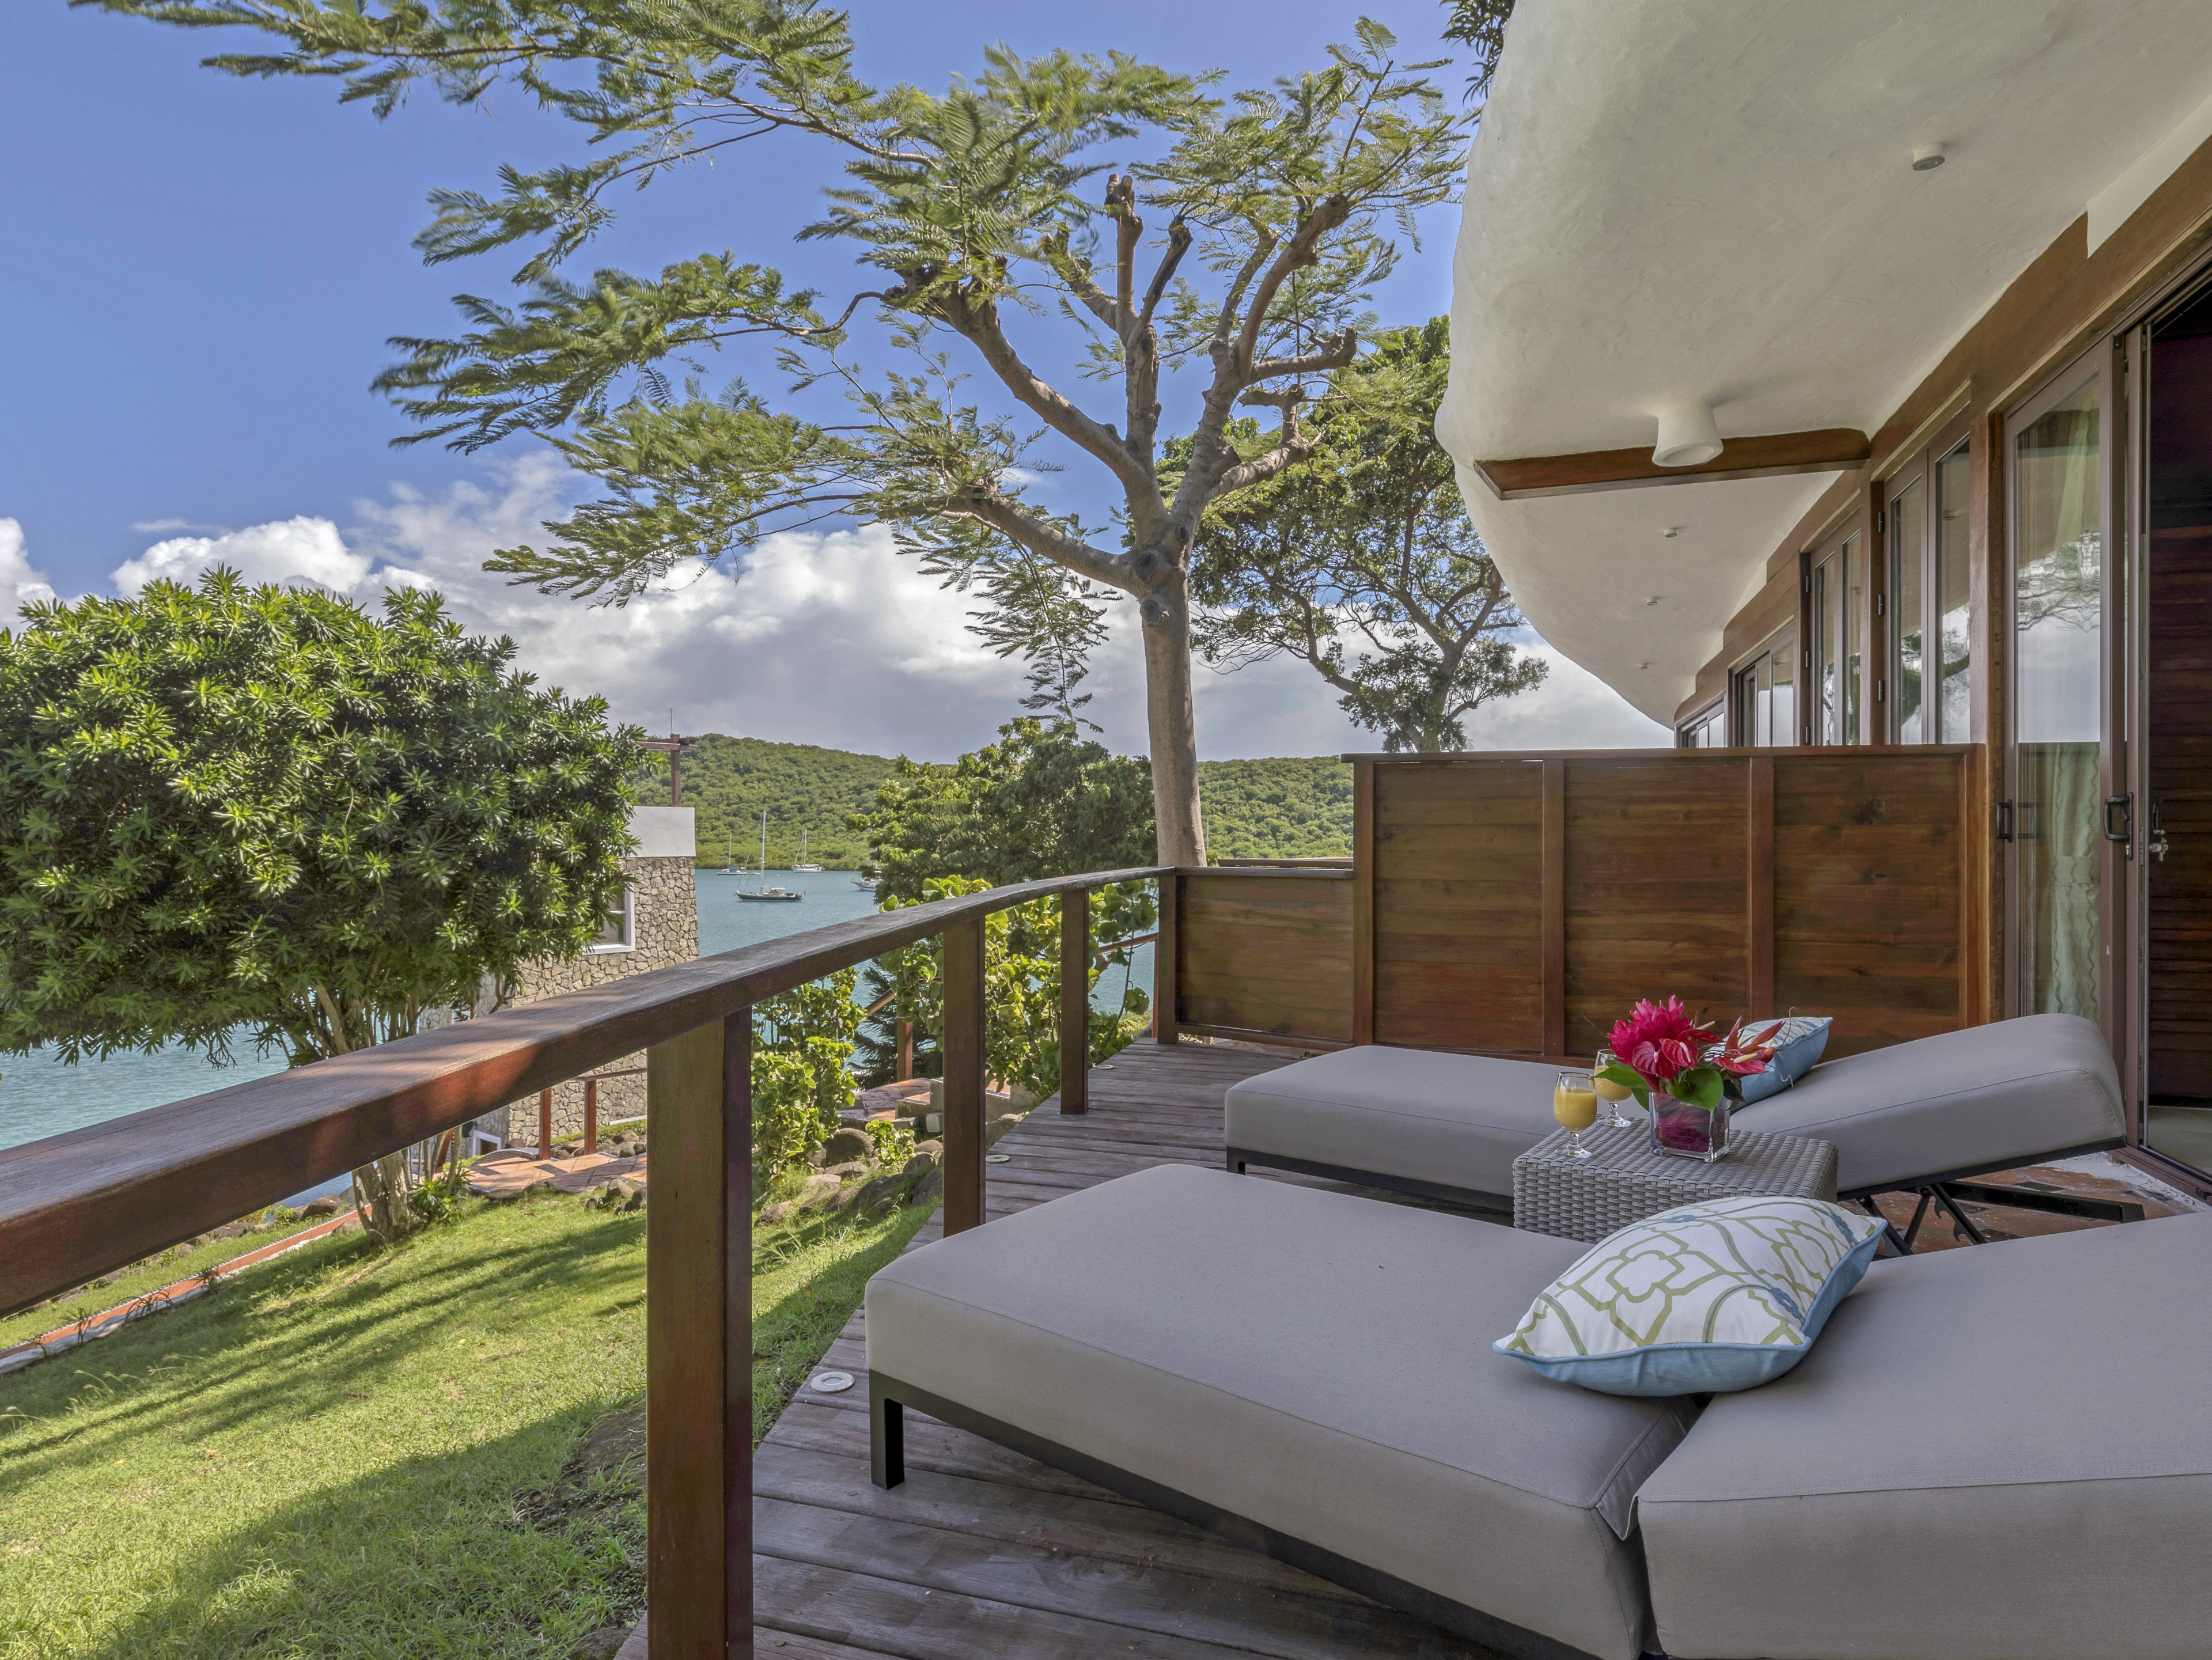 Pet-friendly vacation rentals in Grenada - The Main House